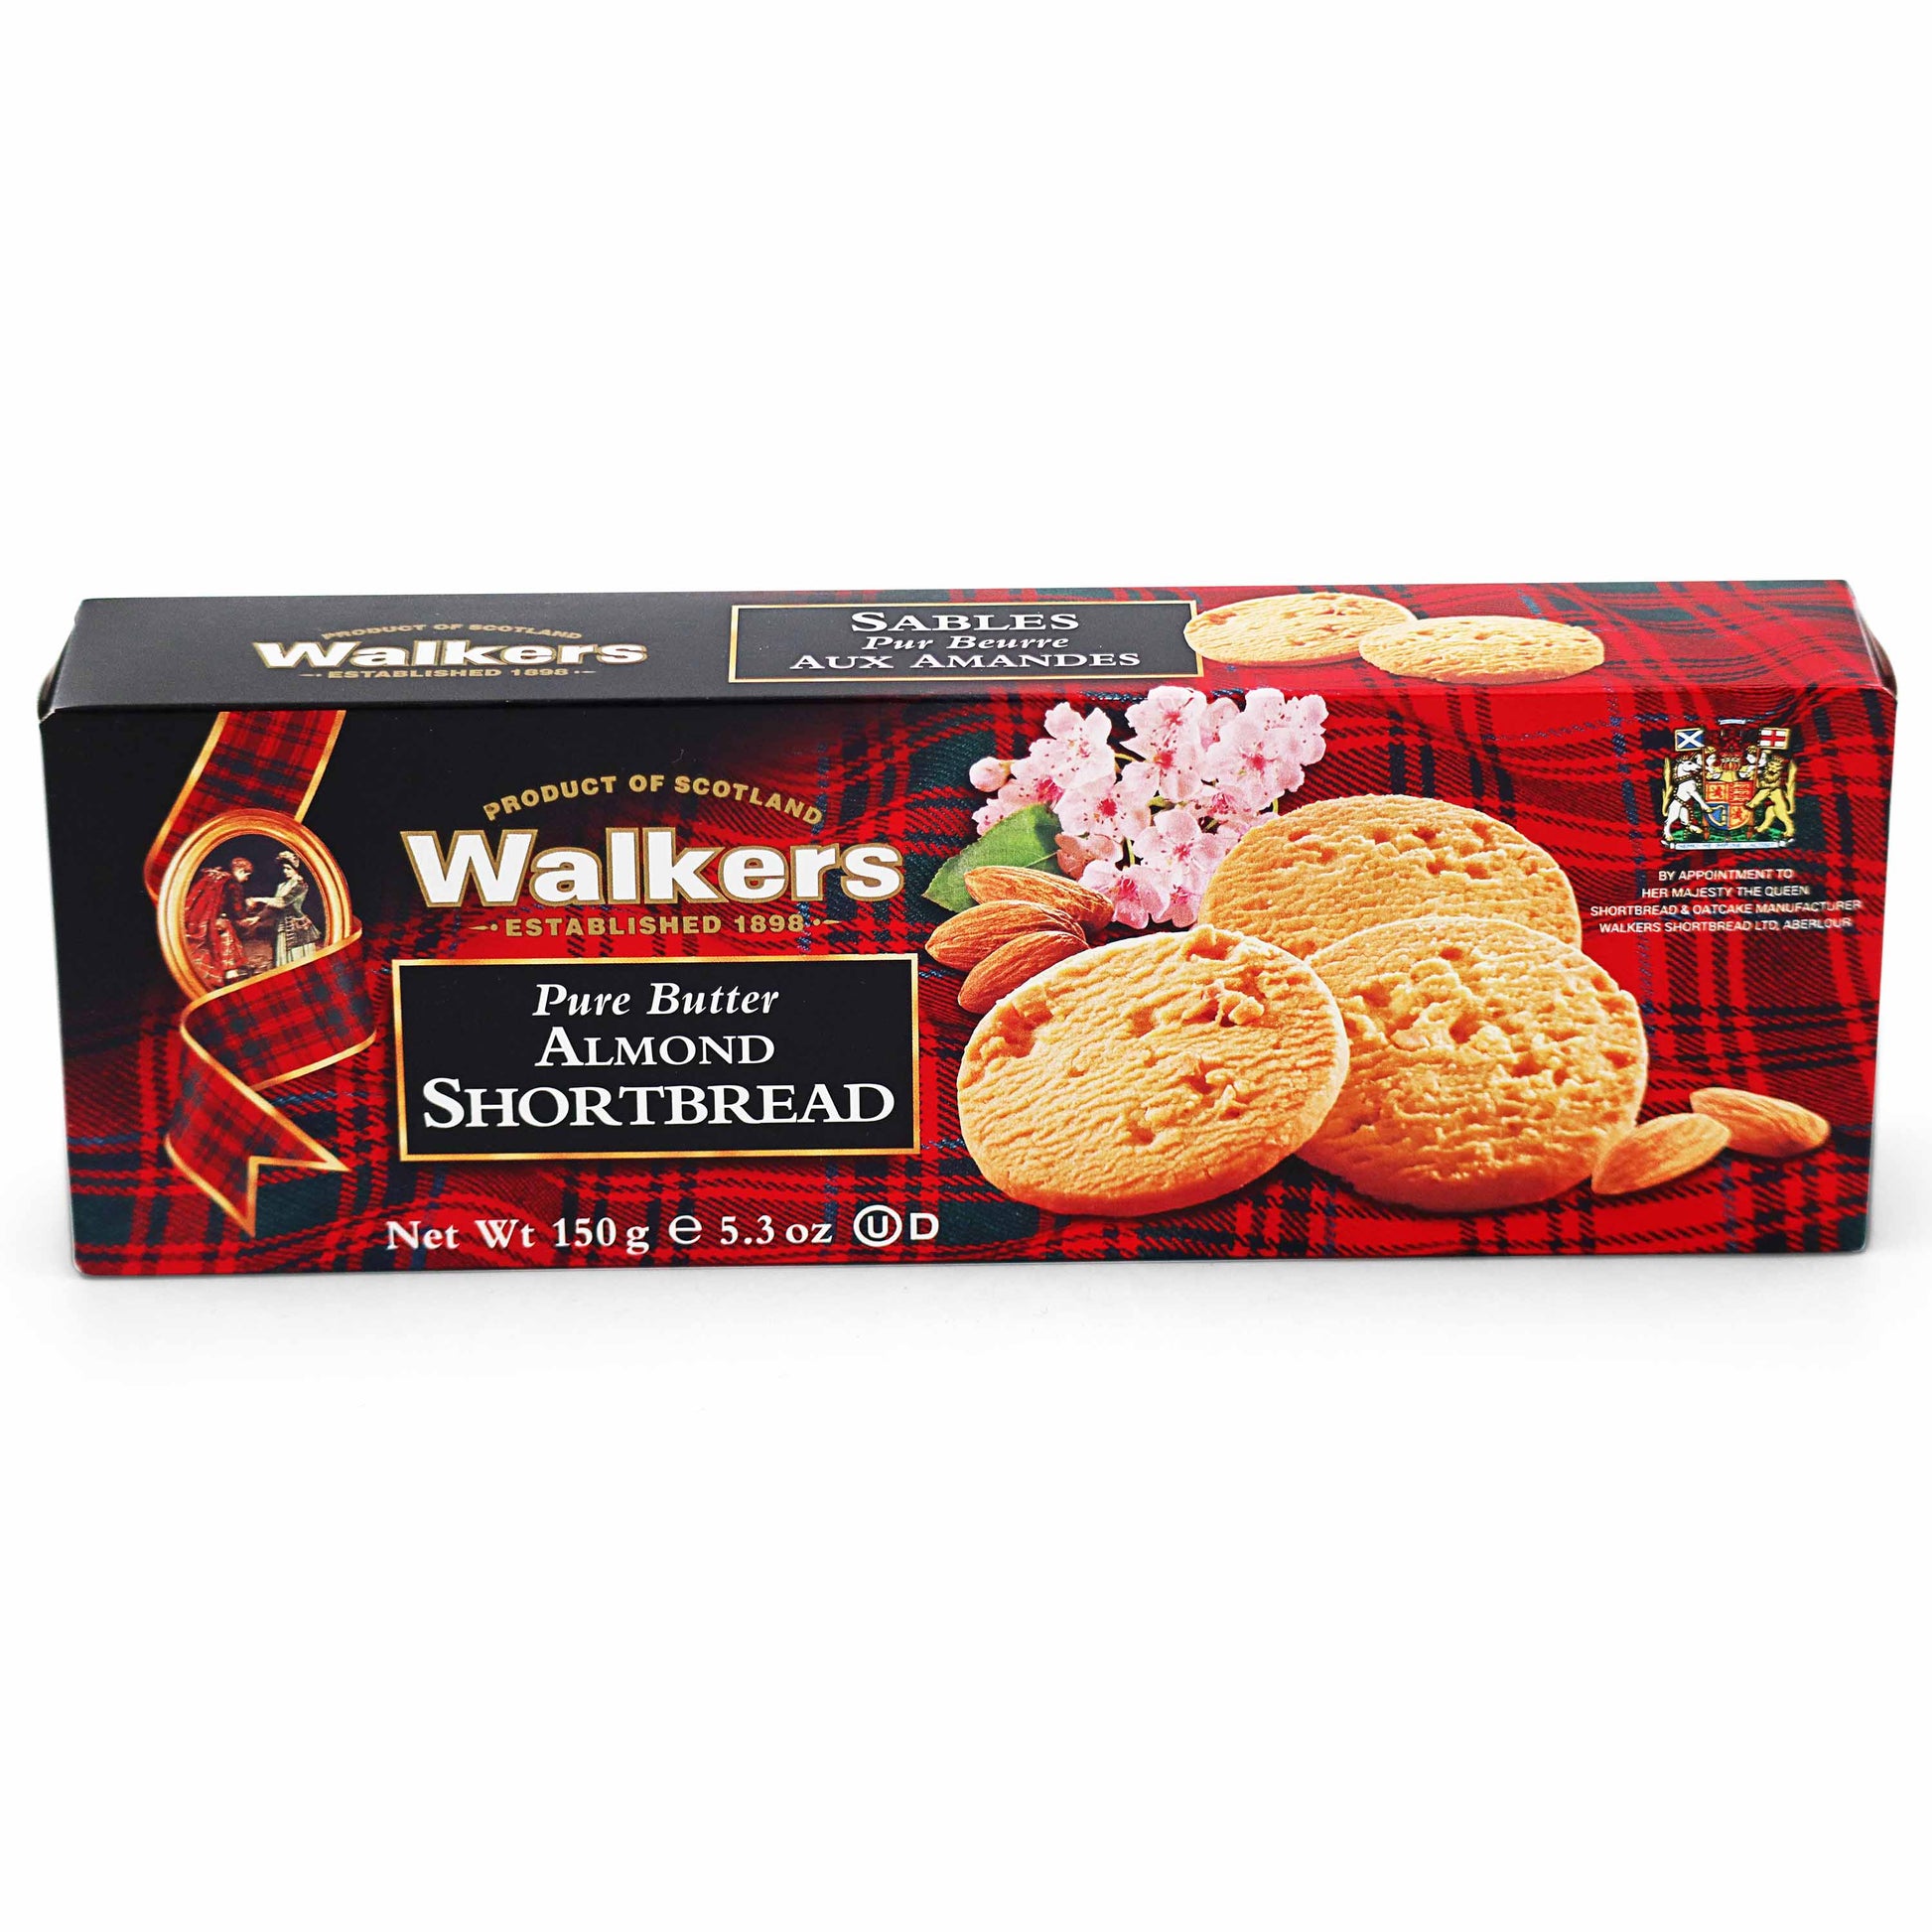 Walkers Pure Butter Almond Shortbread - 150g - London Gifts